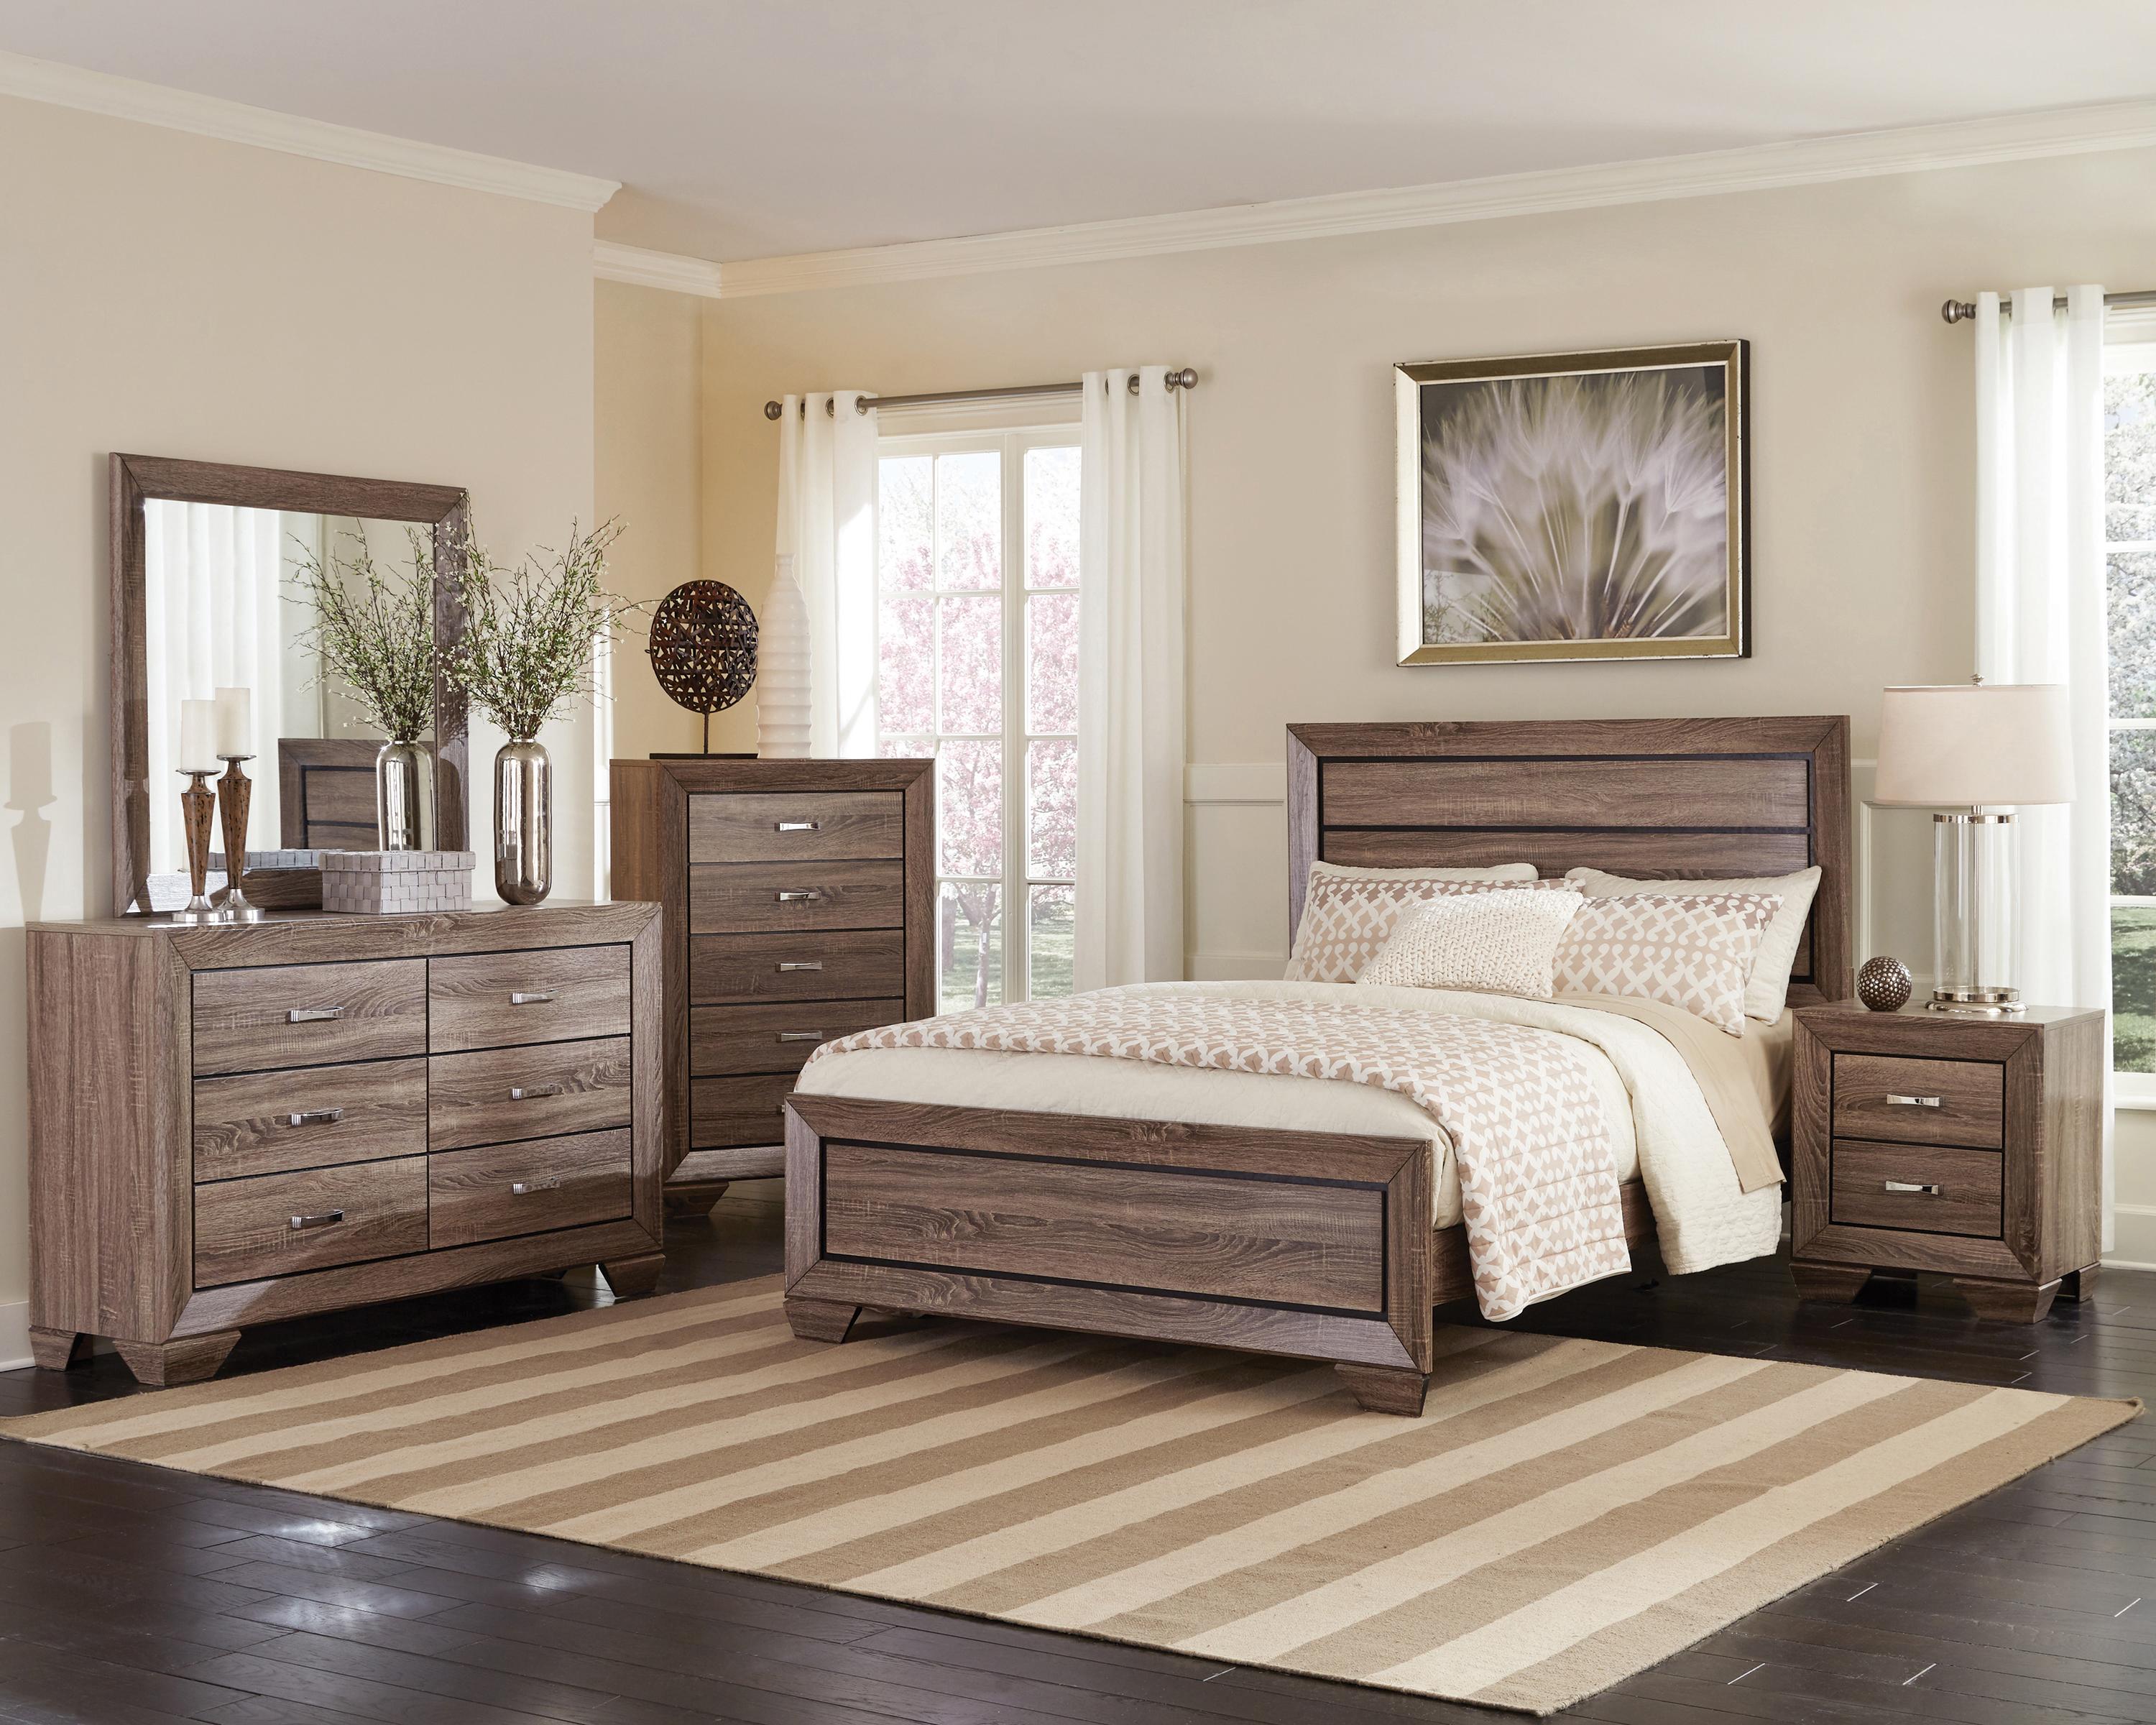 Transitional Bedroom Set 204191Q-3PC Kauffman 204191Q-3PC in Taupe 